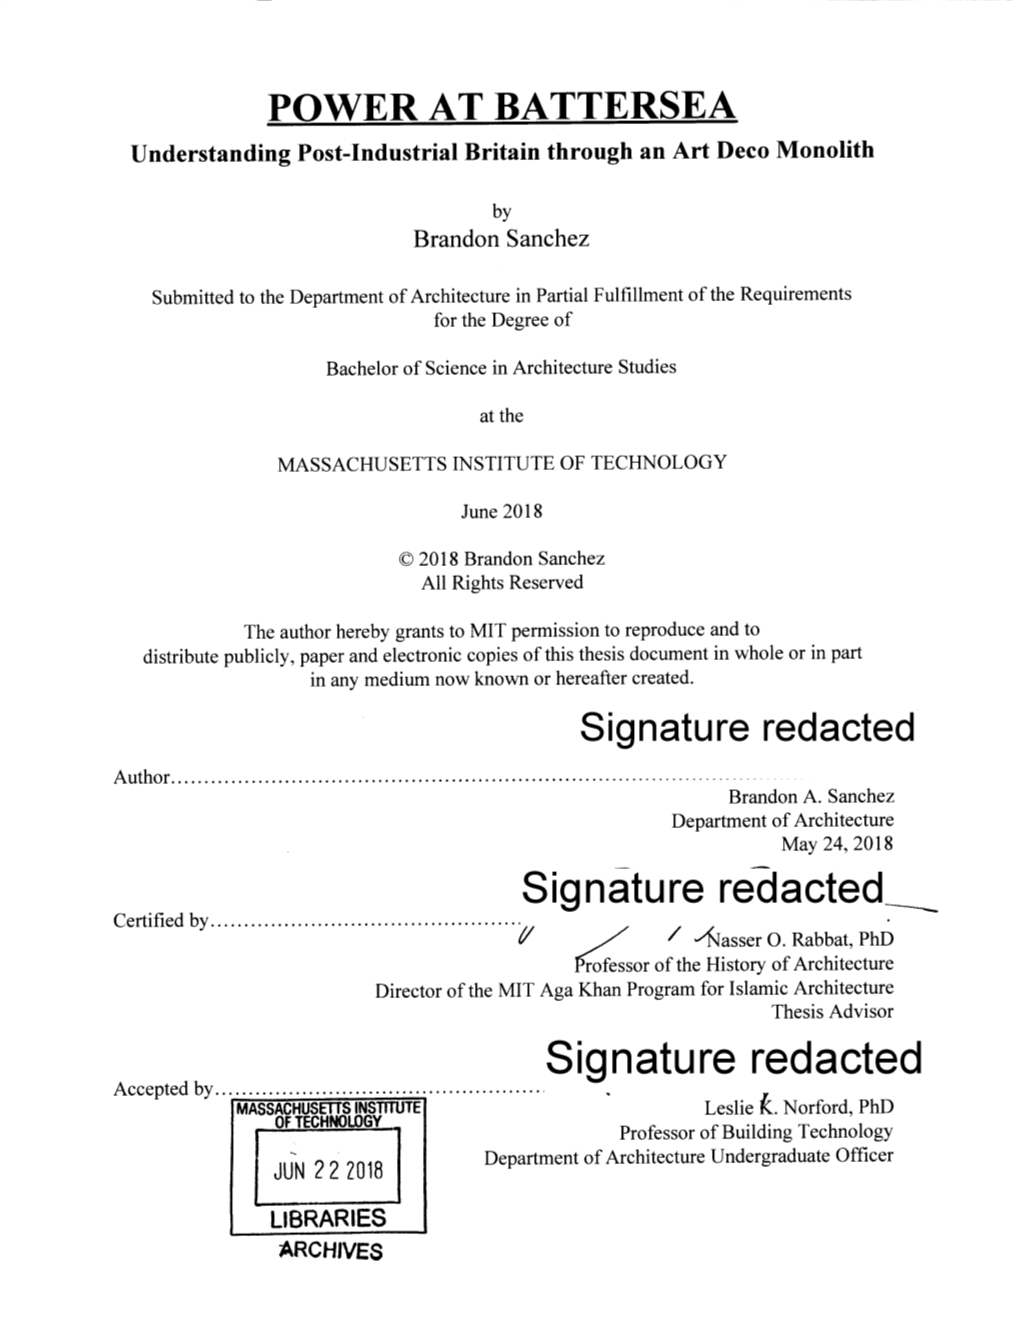 Signature Redacted- Certified By